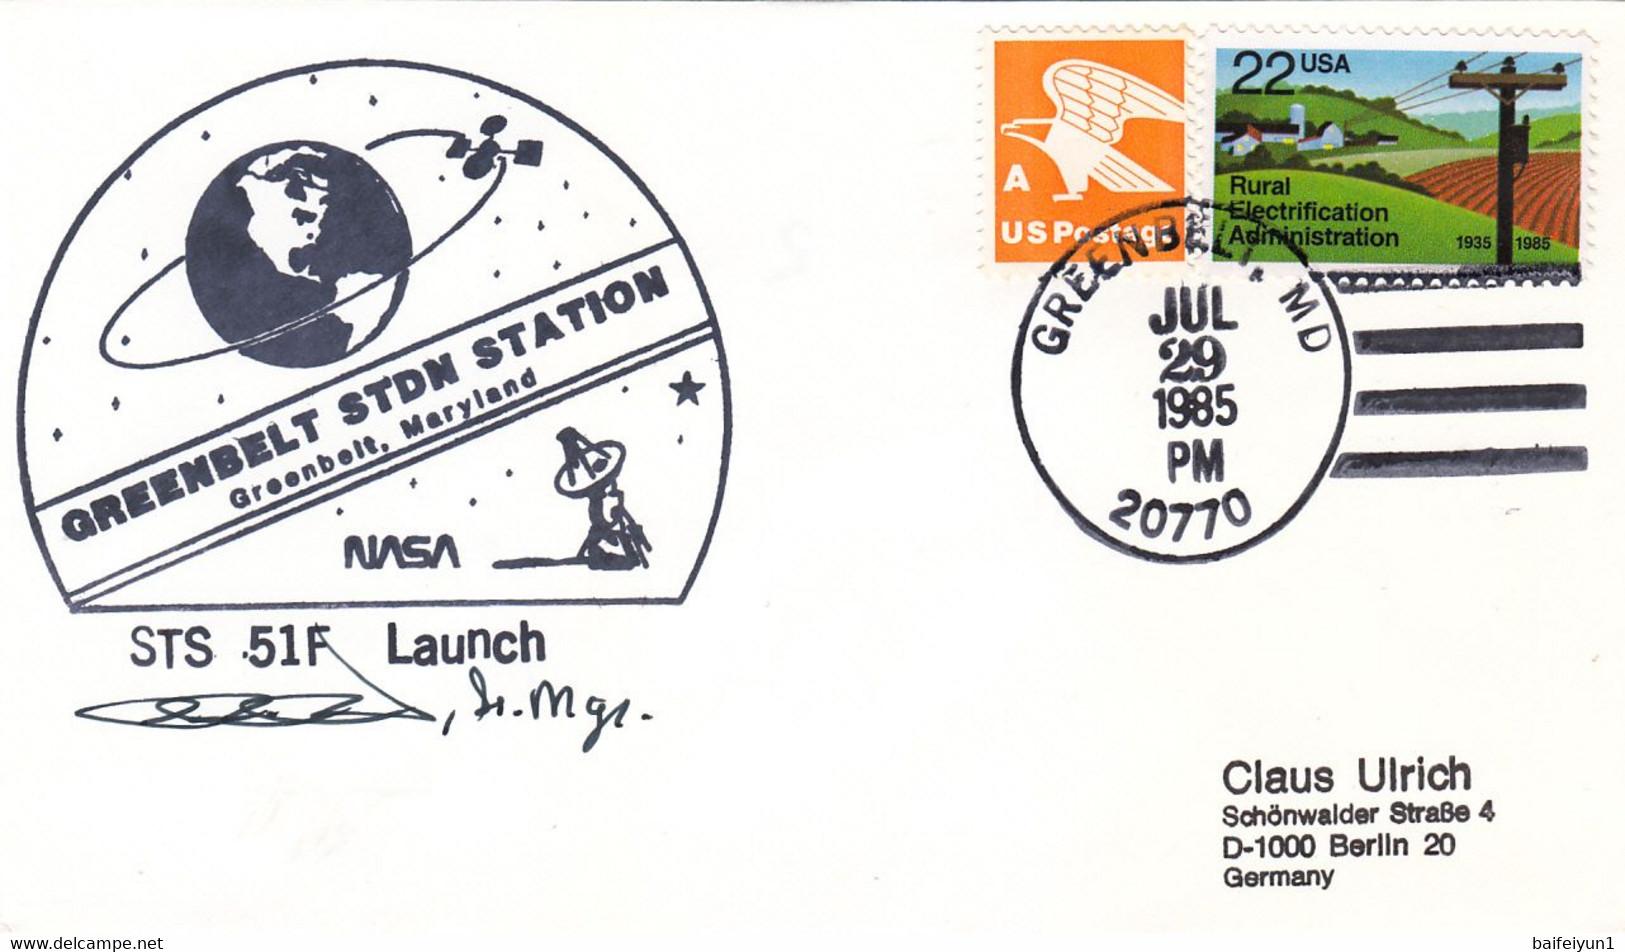 1985 USA  Space Shuttle Challenger STS-51F Mission And Greenbelt STDN STATION Commemorative Cover - Nordamerika